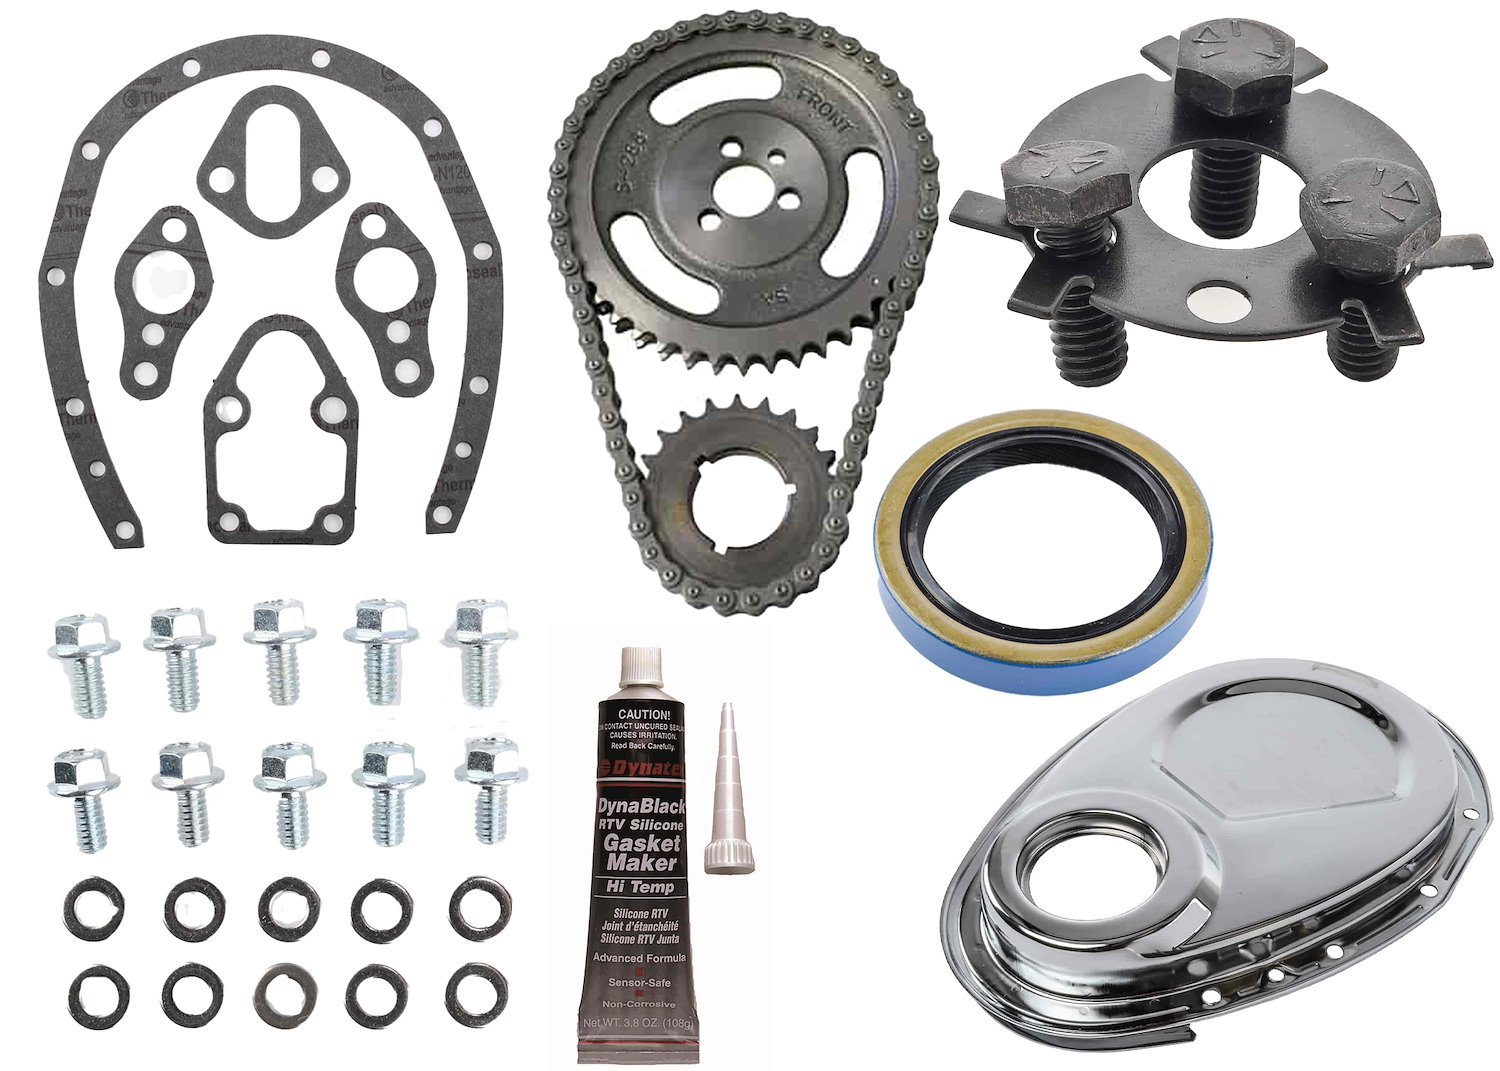 94200K SBC Double Roller Timing Set Kit for Chevy 283-400 V8 Small Block